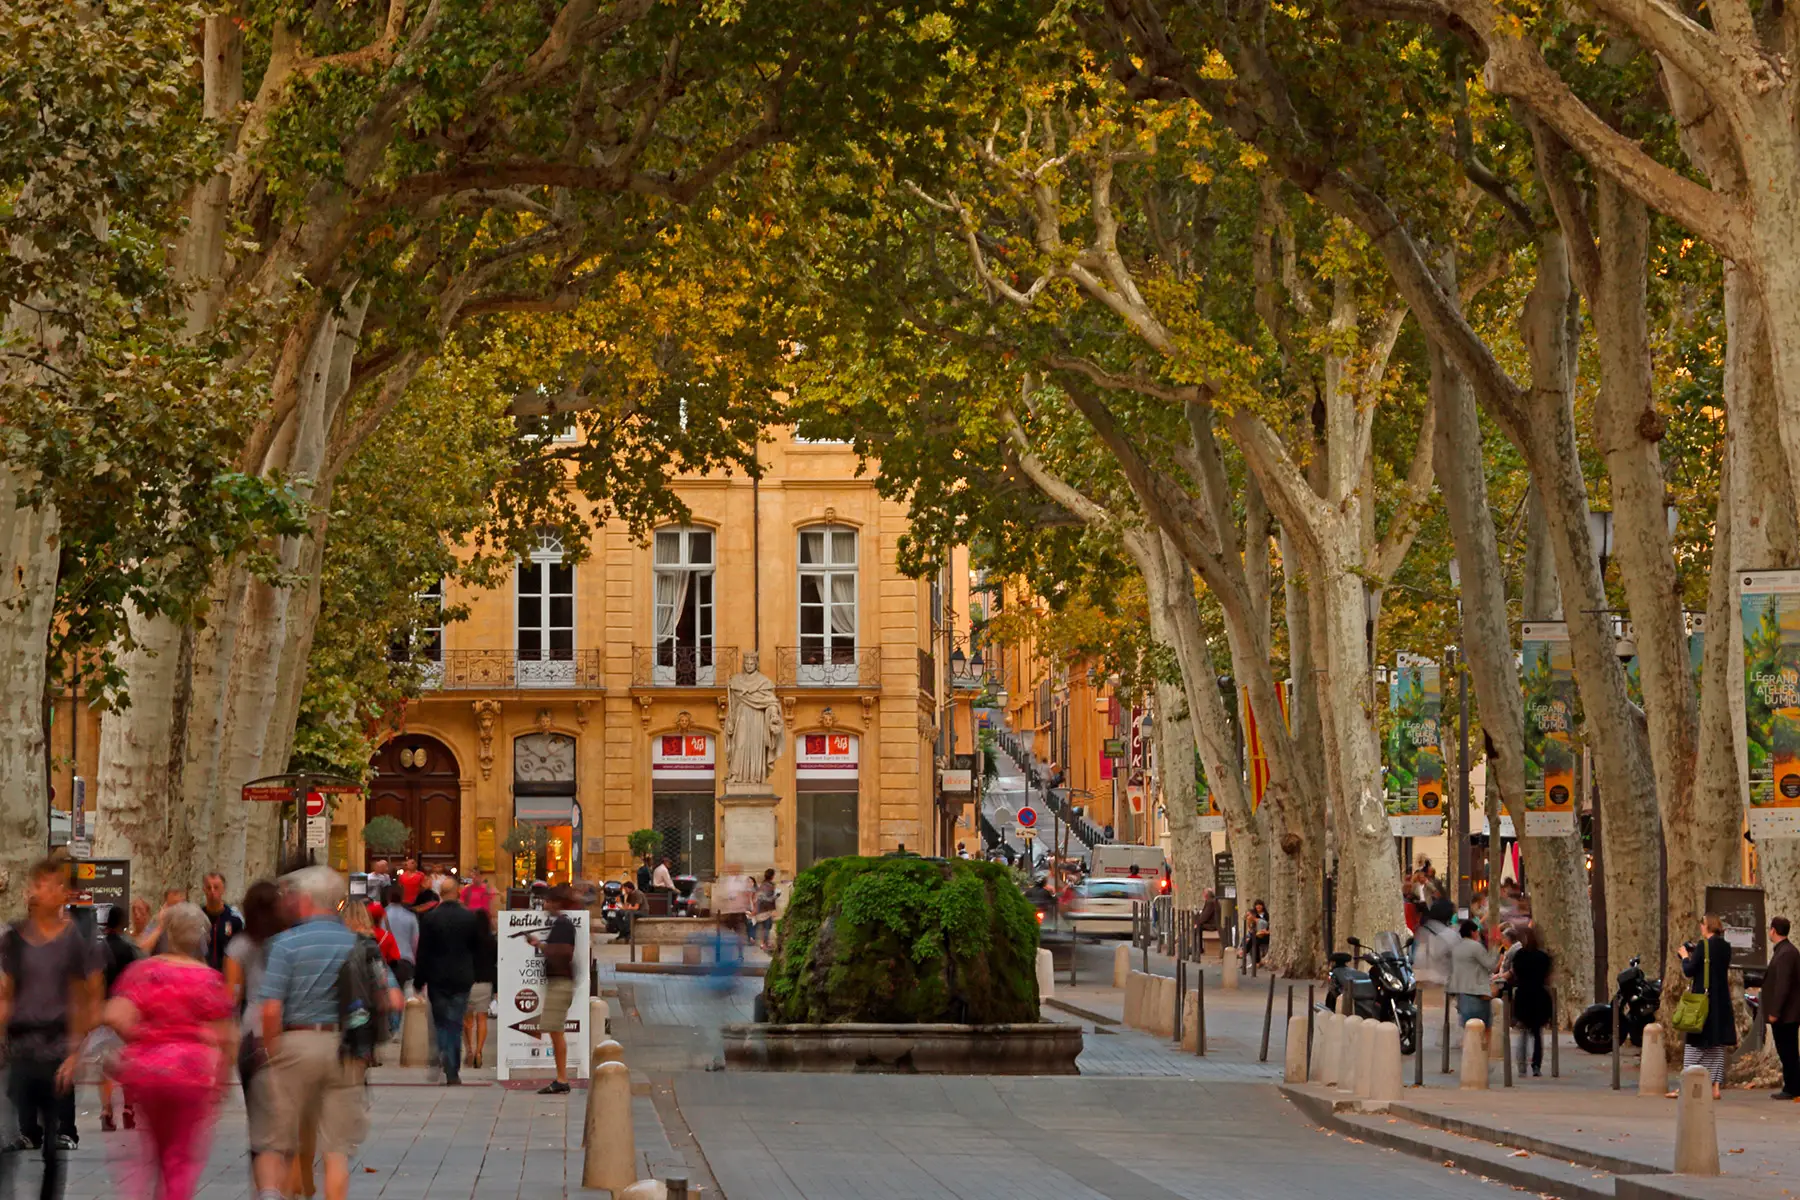 A paved shopping street with people, lined with trees